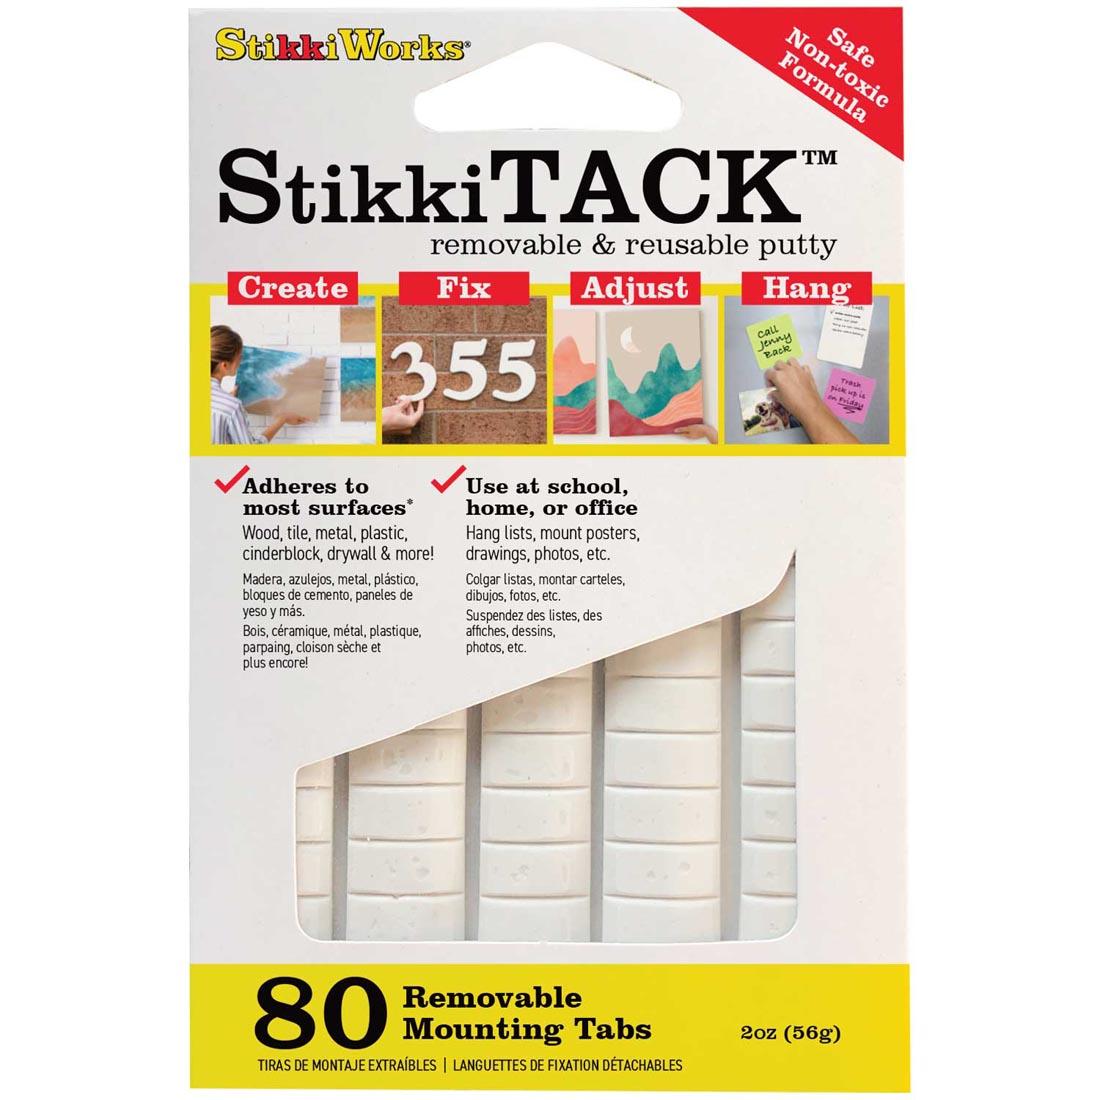 StikkiTACK Removable & Reusable Putty in package